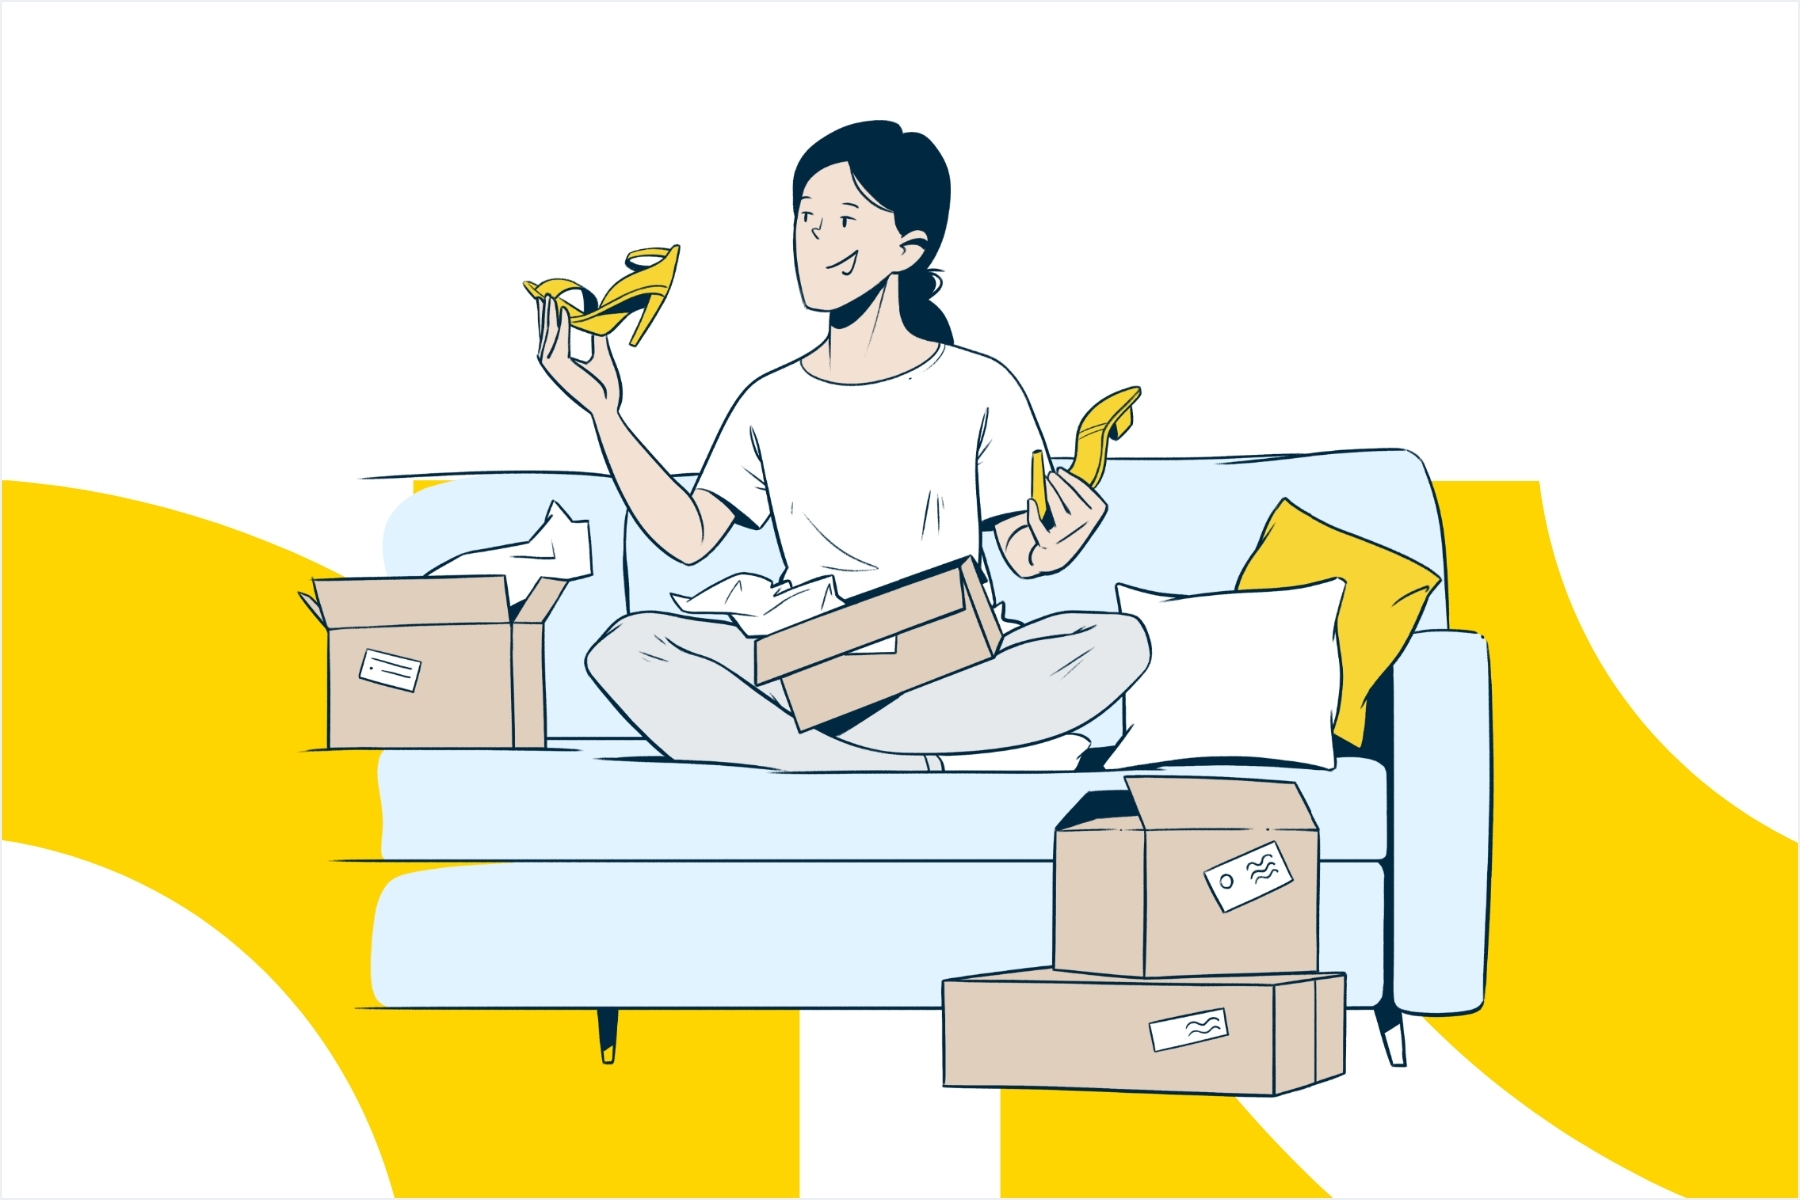 Illustration of Happy Customer Unboxing Shoes